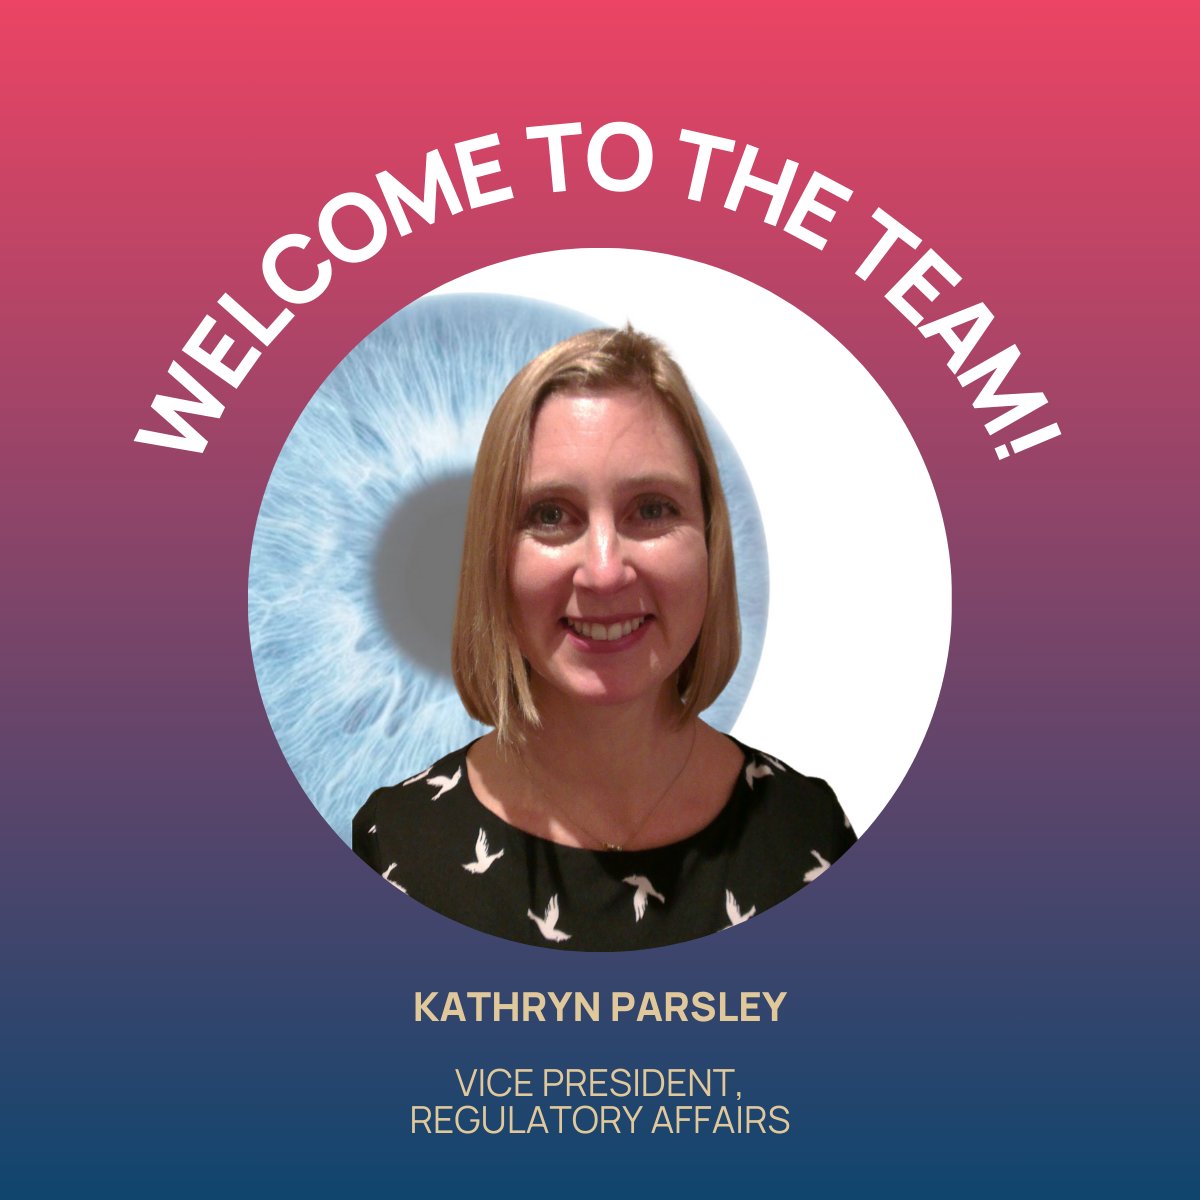 We welcome Kate to the team as our Vice President, Regulatory Affairs. 🎉 

#WelcomeAboard #GeneTherapy #ophthalmology #ComplementBiology #team #JobOpening #JoinUs